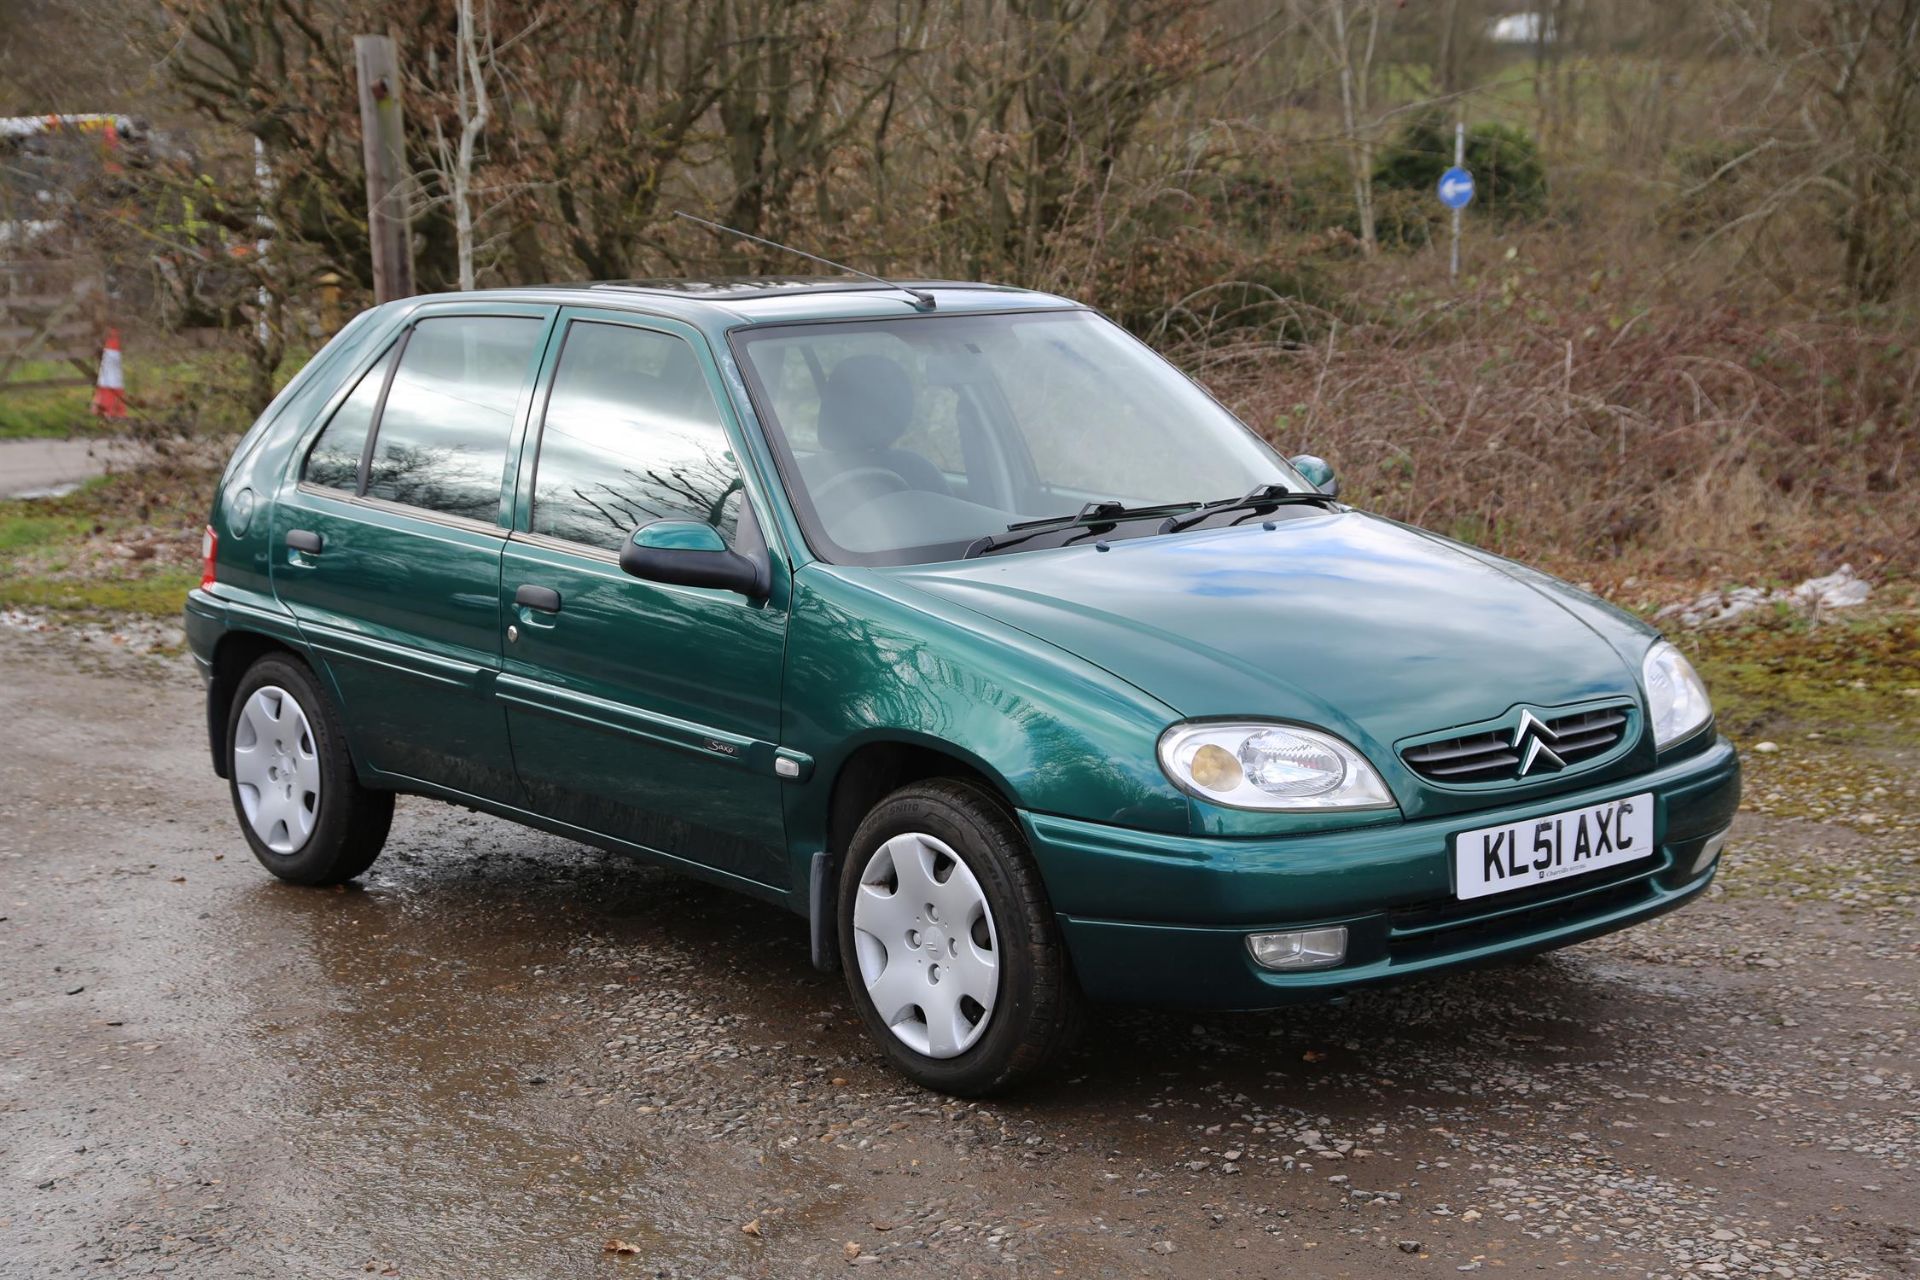 Citroen Saxo 2001 This car is ULEZ compliant Registration: KL51 AXC. One owner from new with